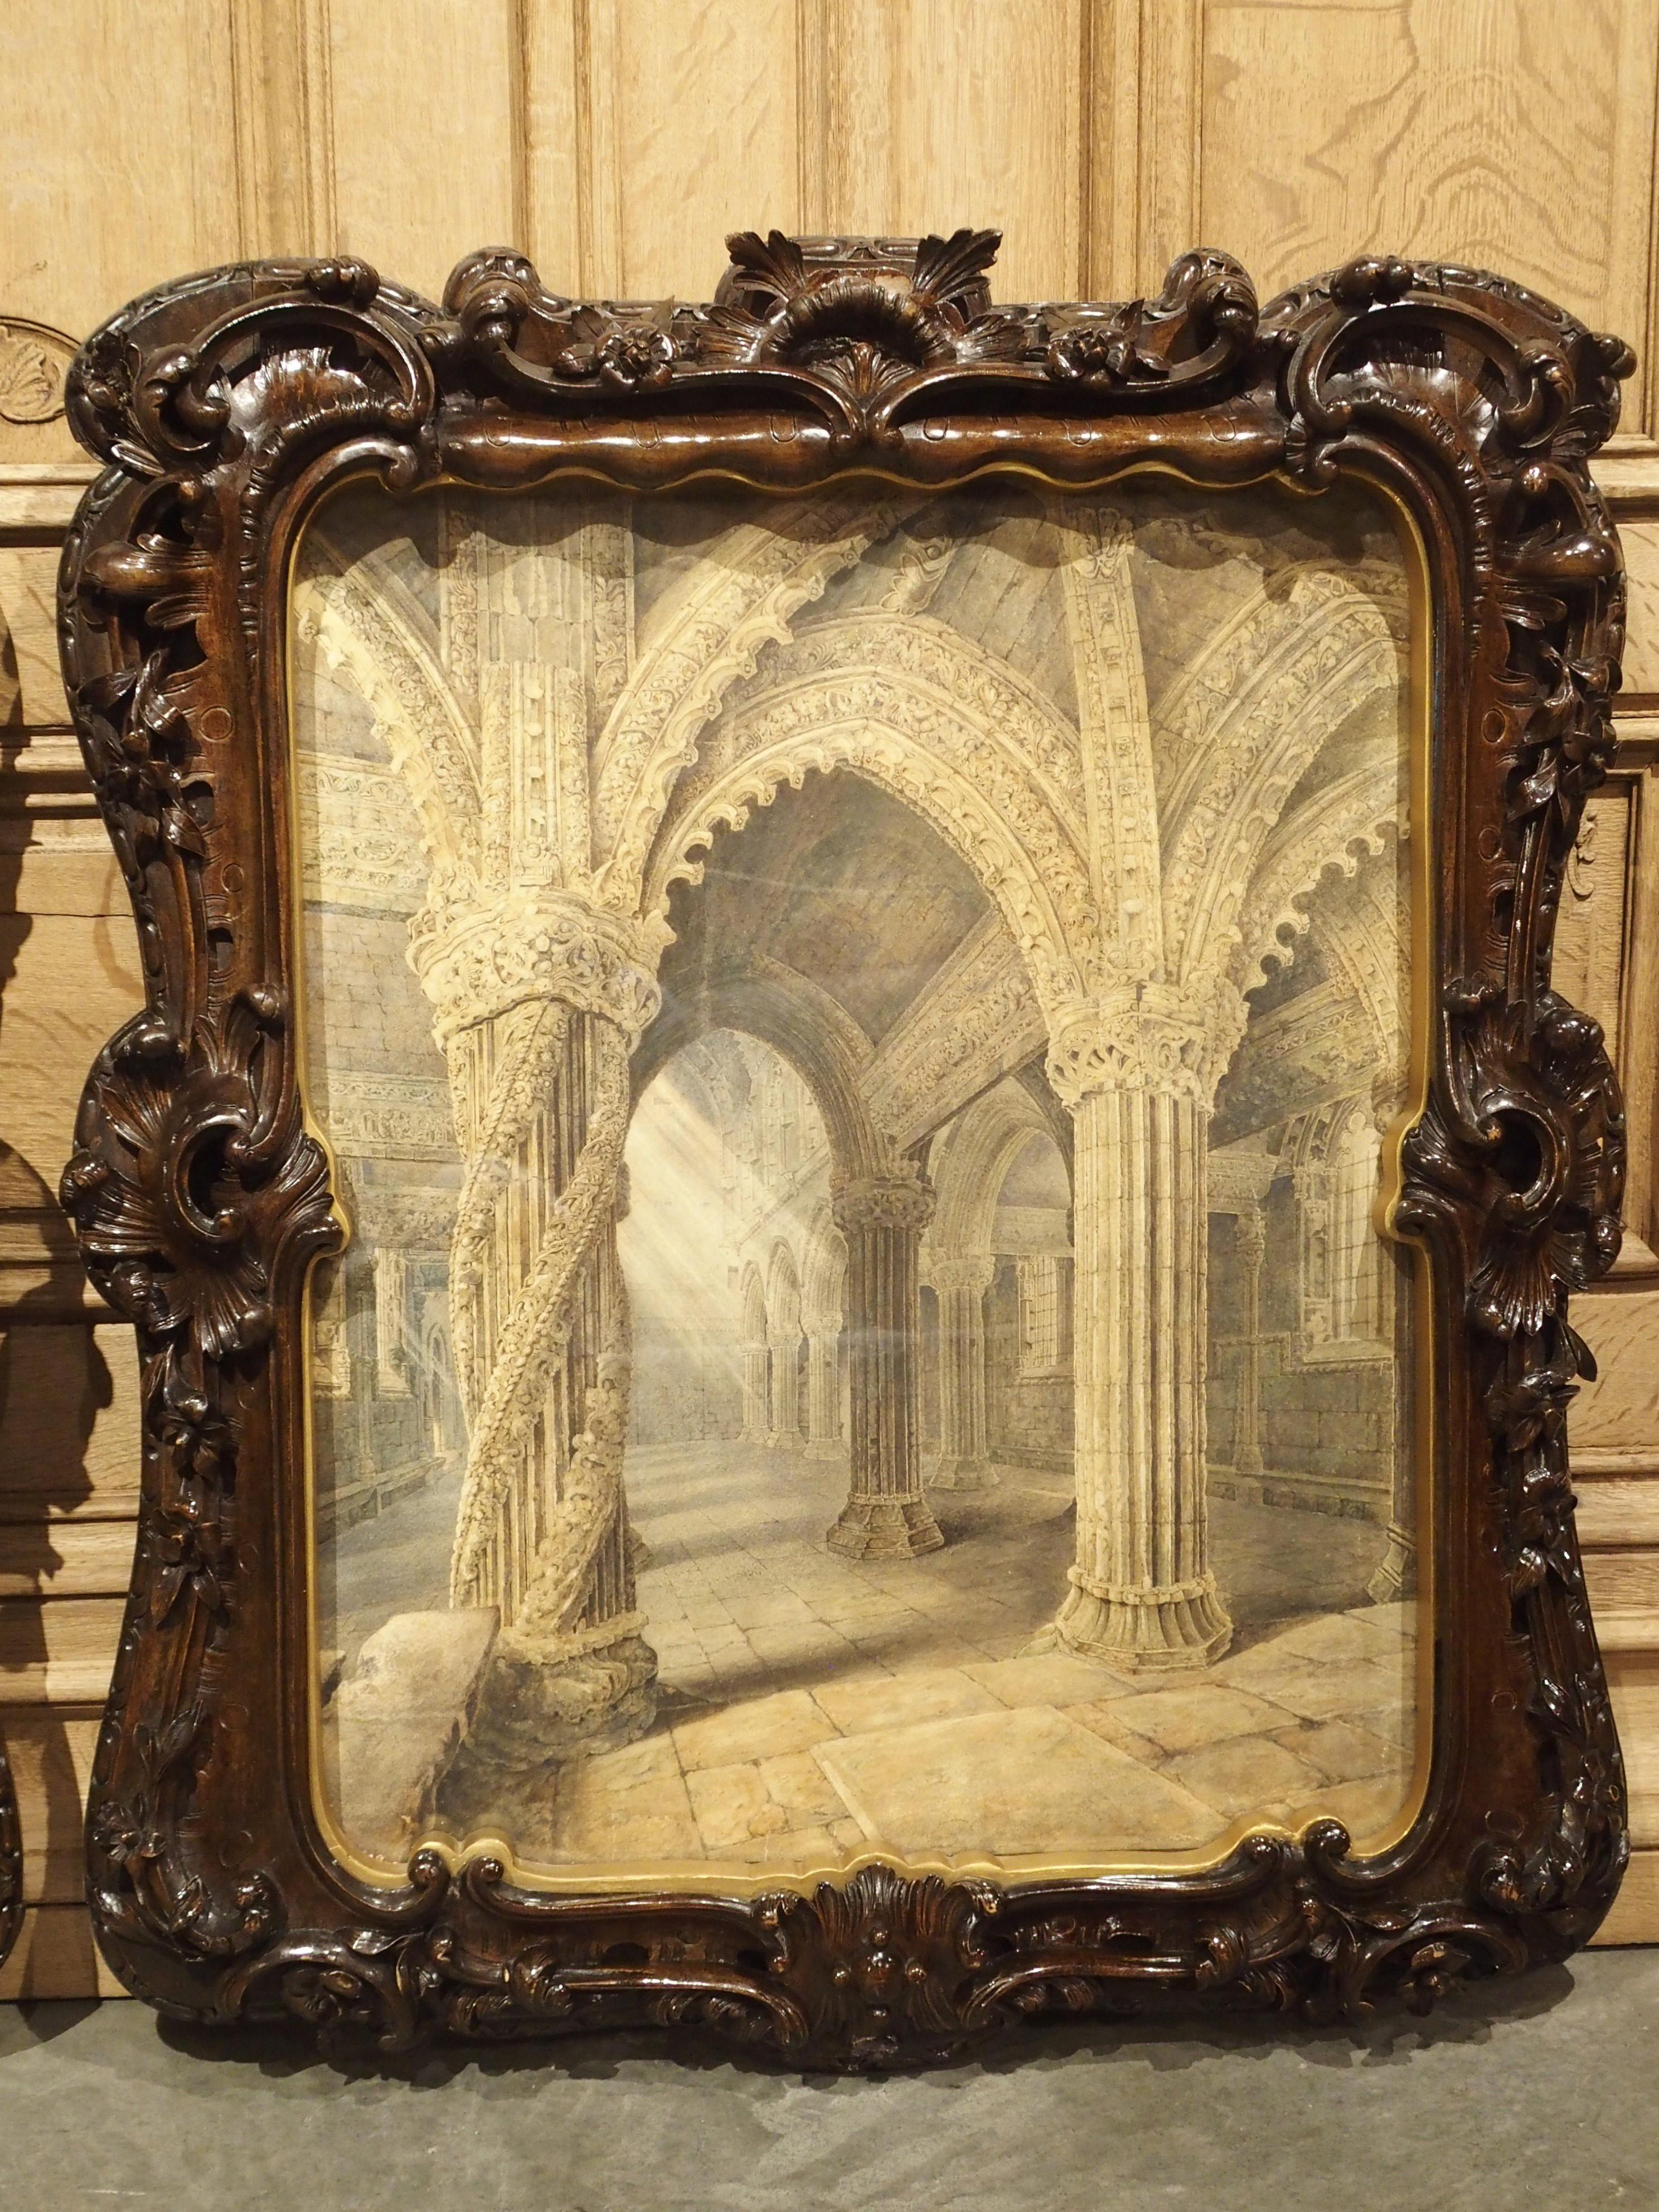 This impressive pair of large watercolor paintings are surrounded by elaborate hand carved fruitwood frames which depict the interior of the famed Rosslyn Chapel.

The Rosslyn Chapel is a 15th century chapel located in Roslin, Scotland, just